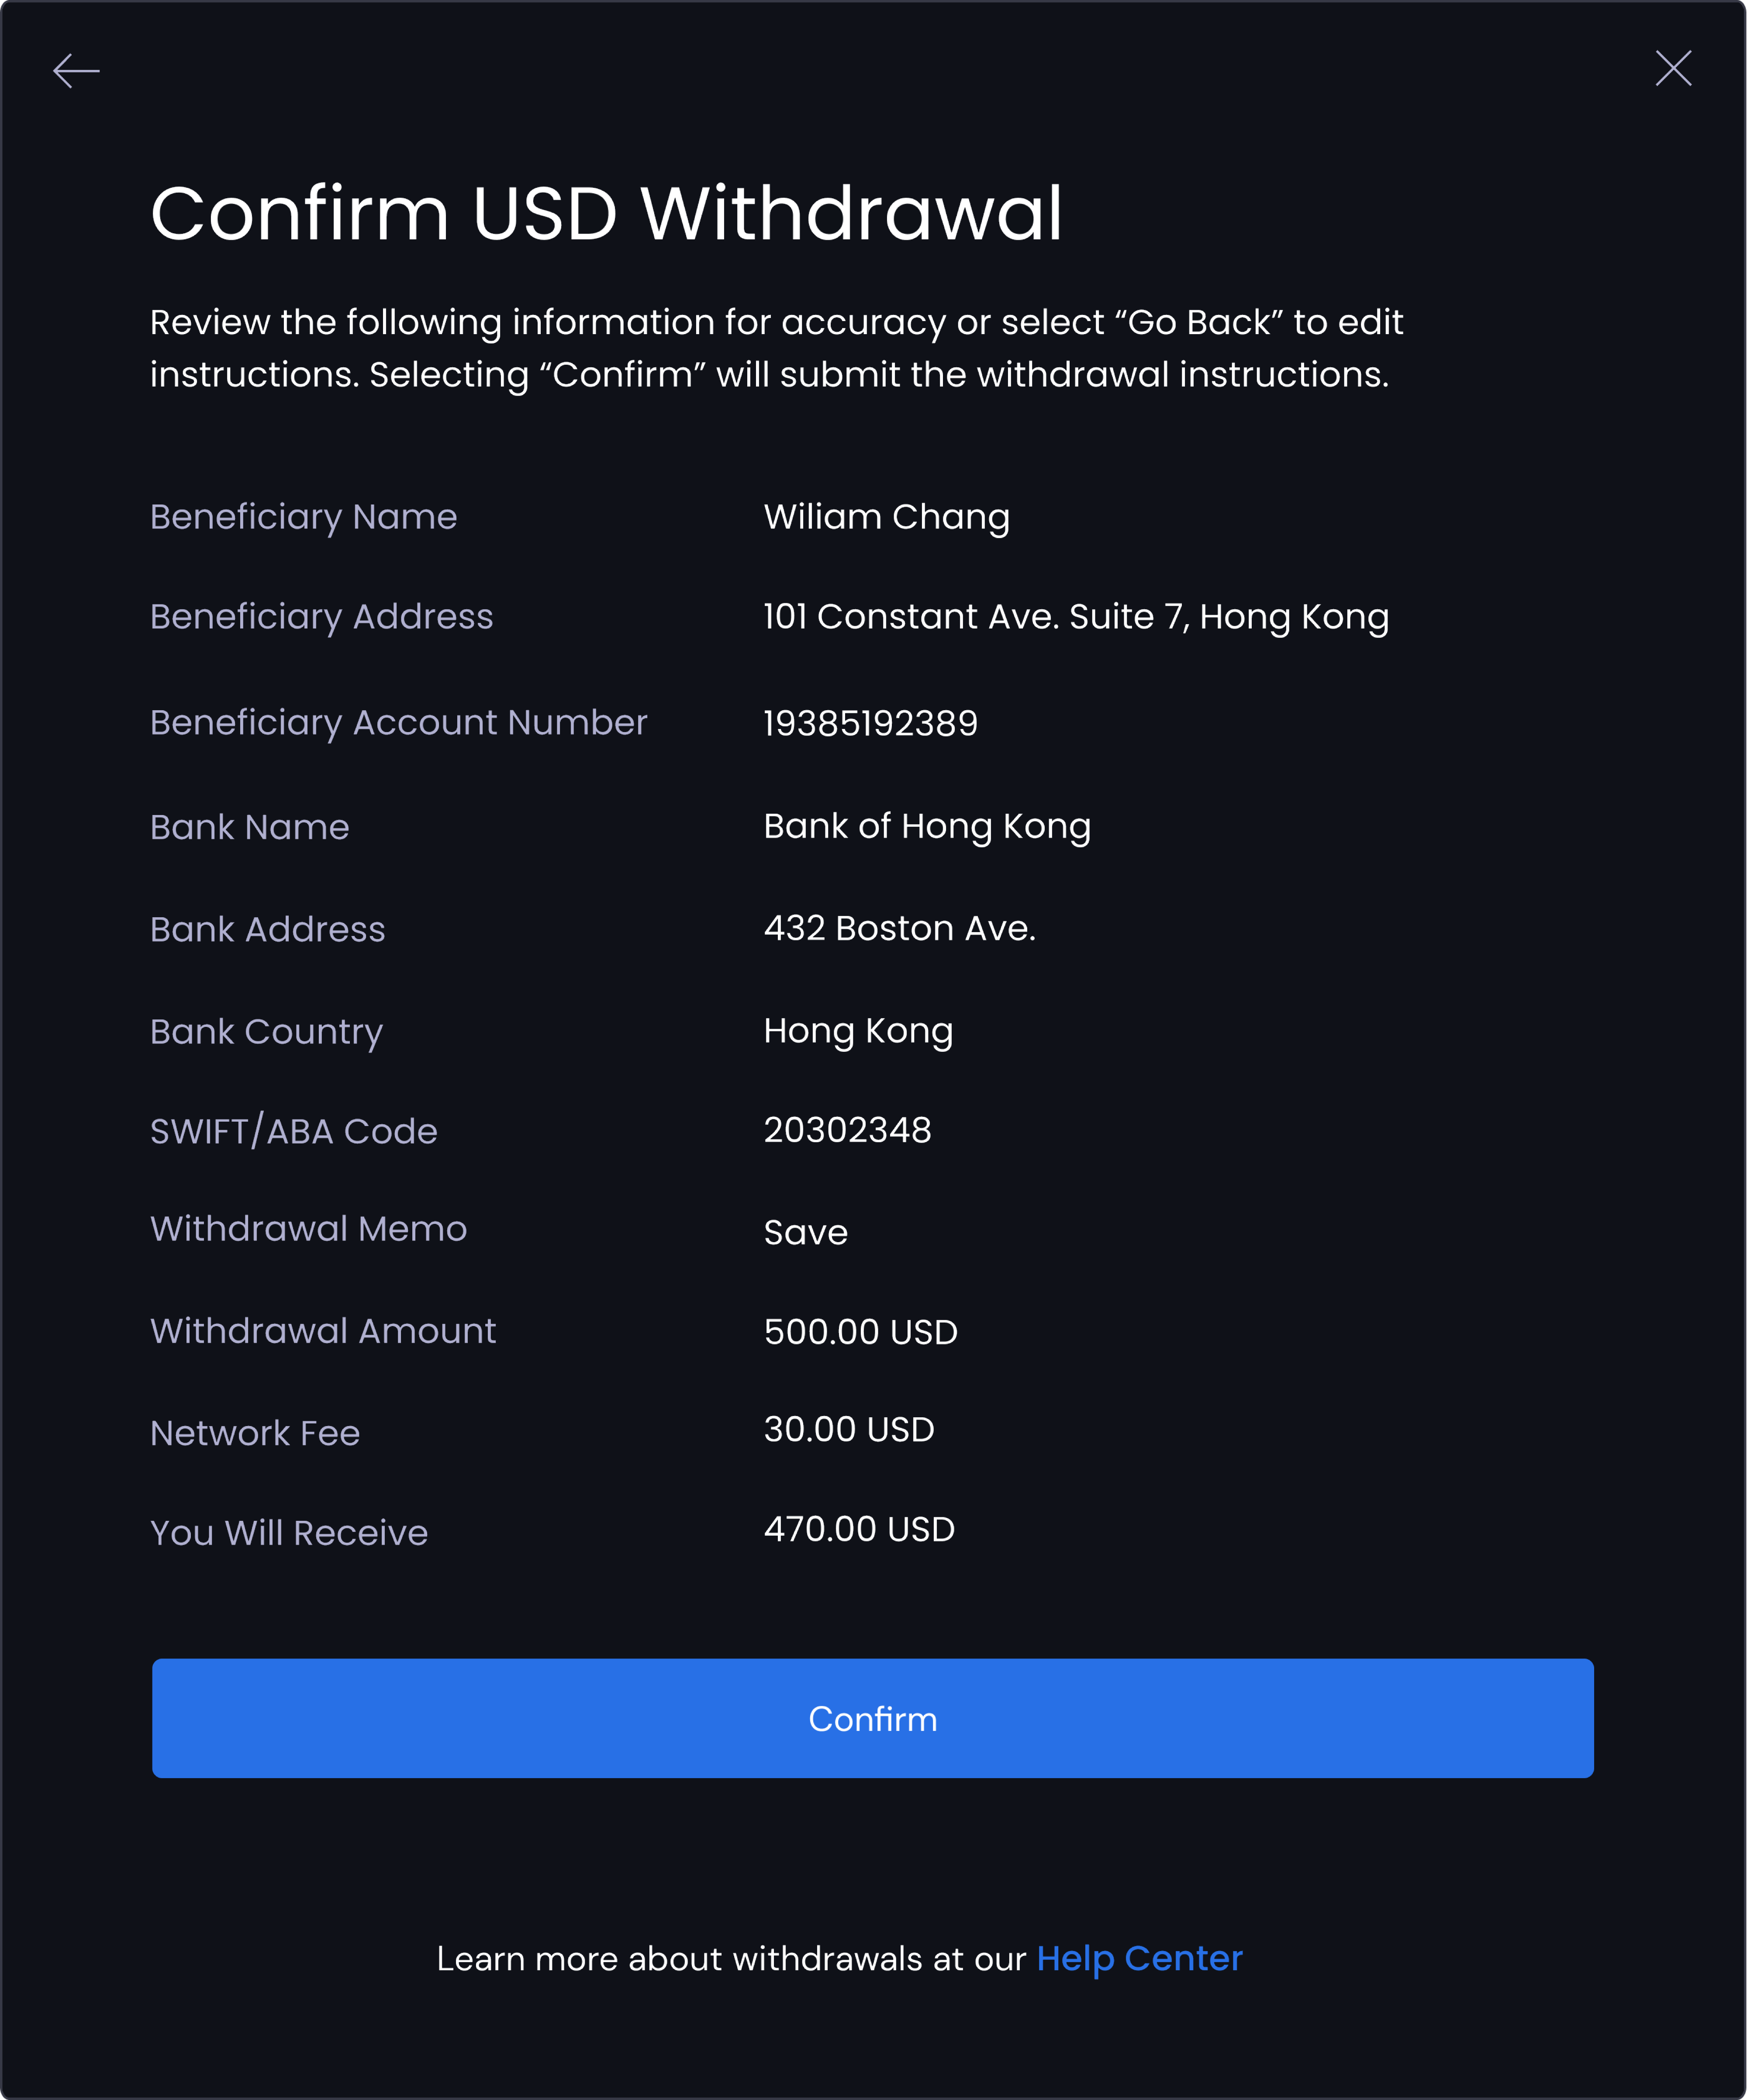 Confirm USD withdrawal popup window